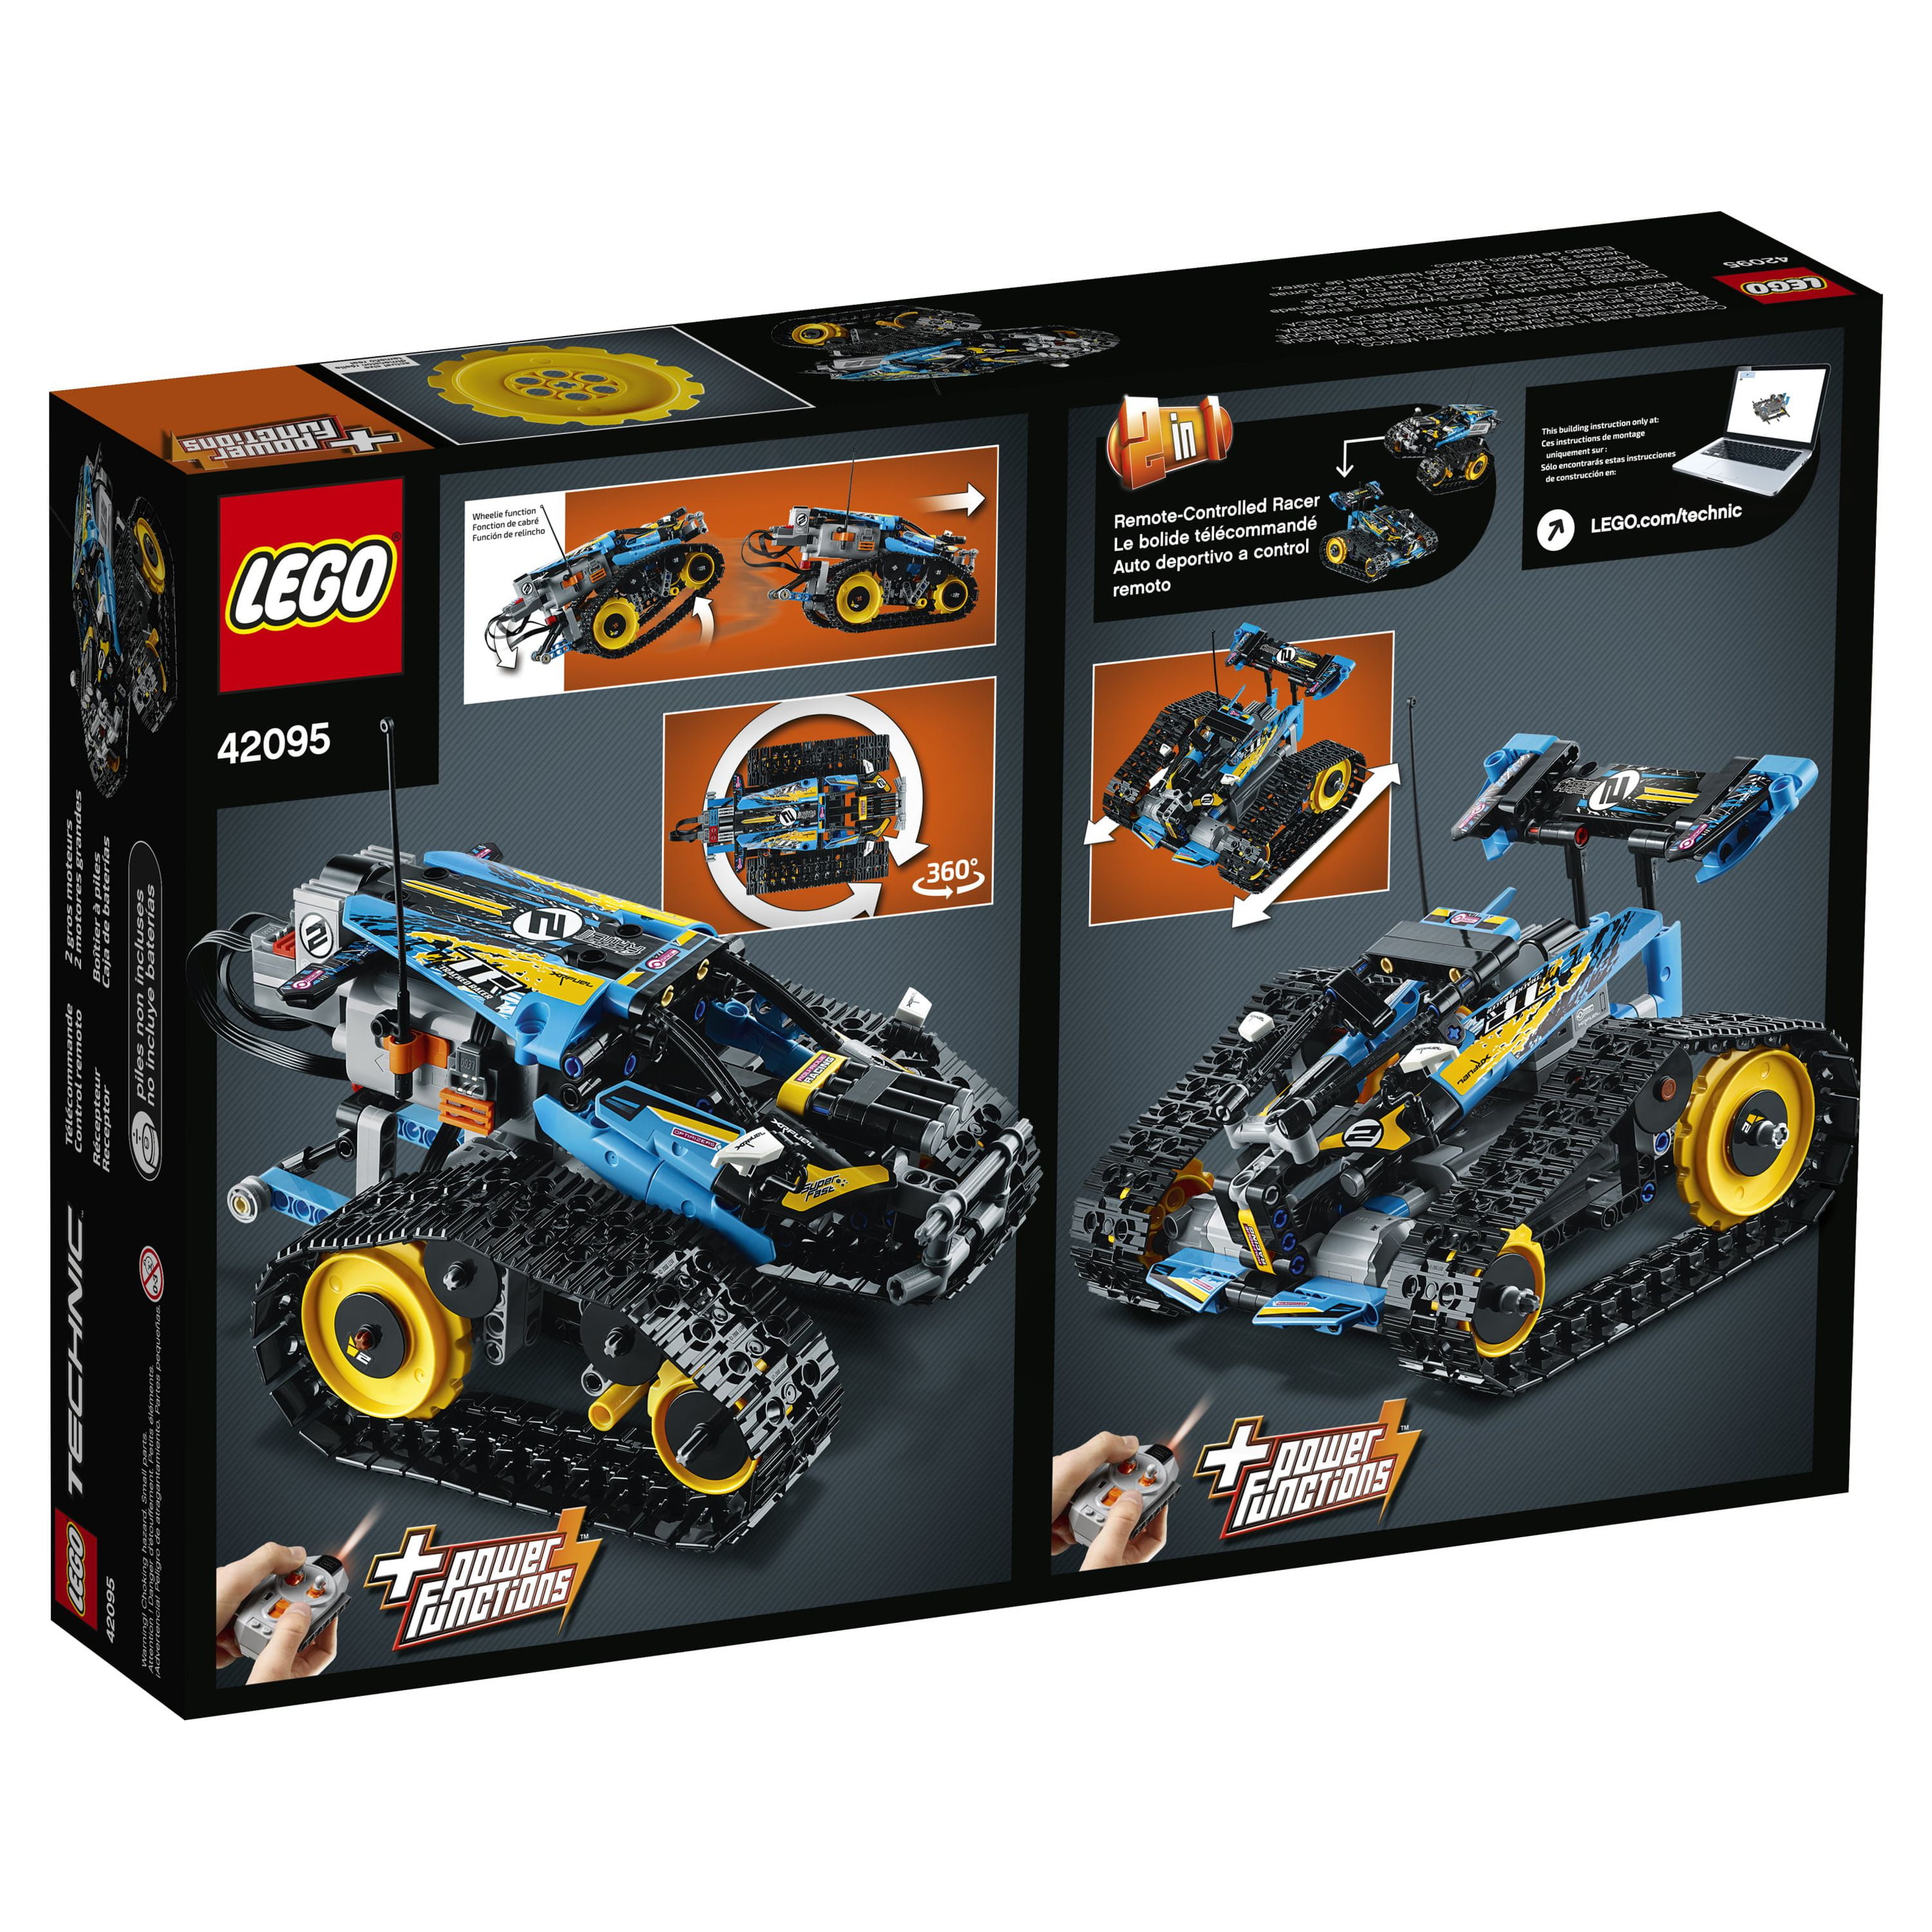 Certified Used Set 42095 Technic Remote-Controlled Stunt Racer